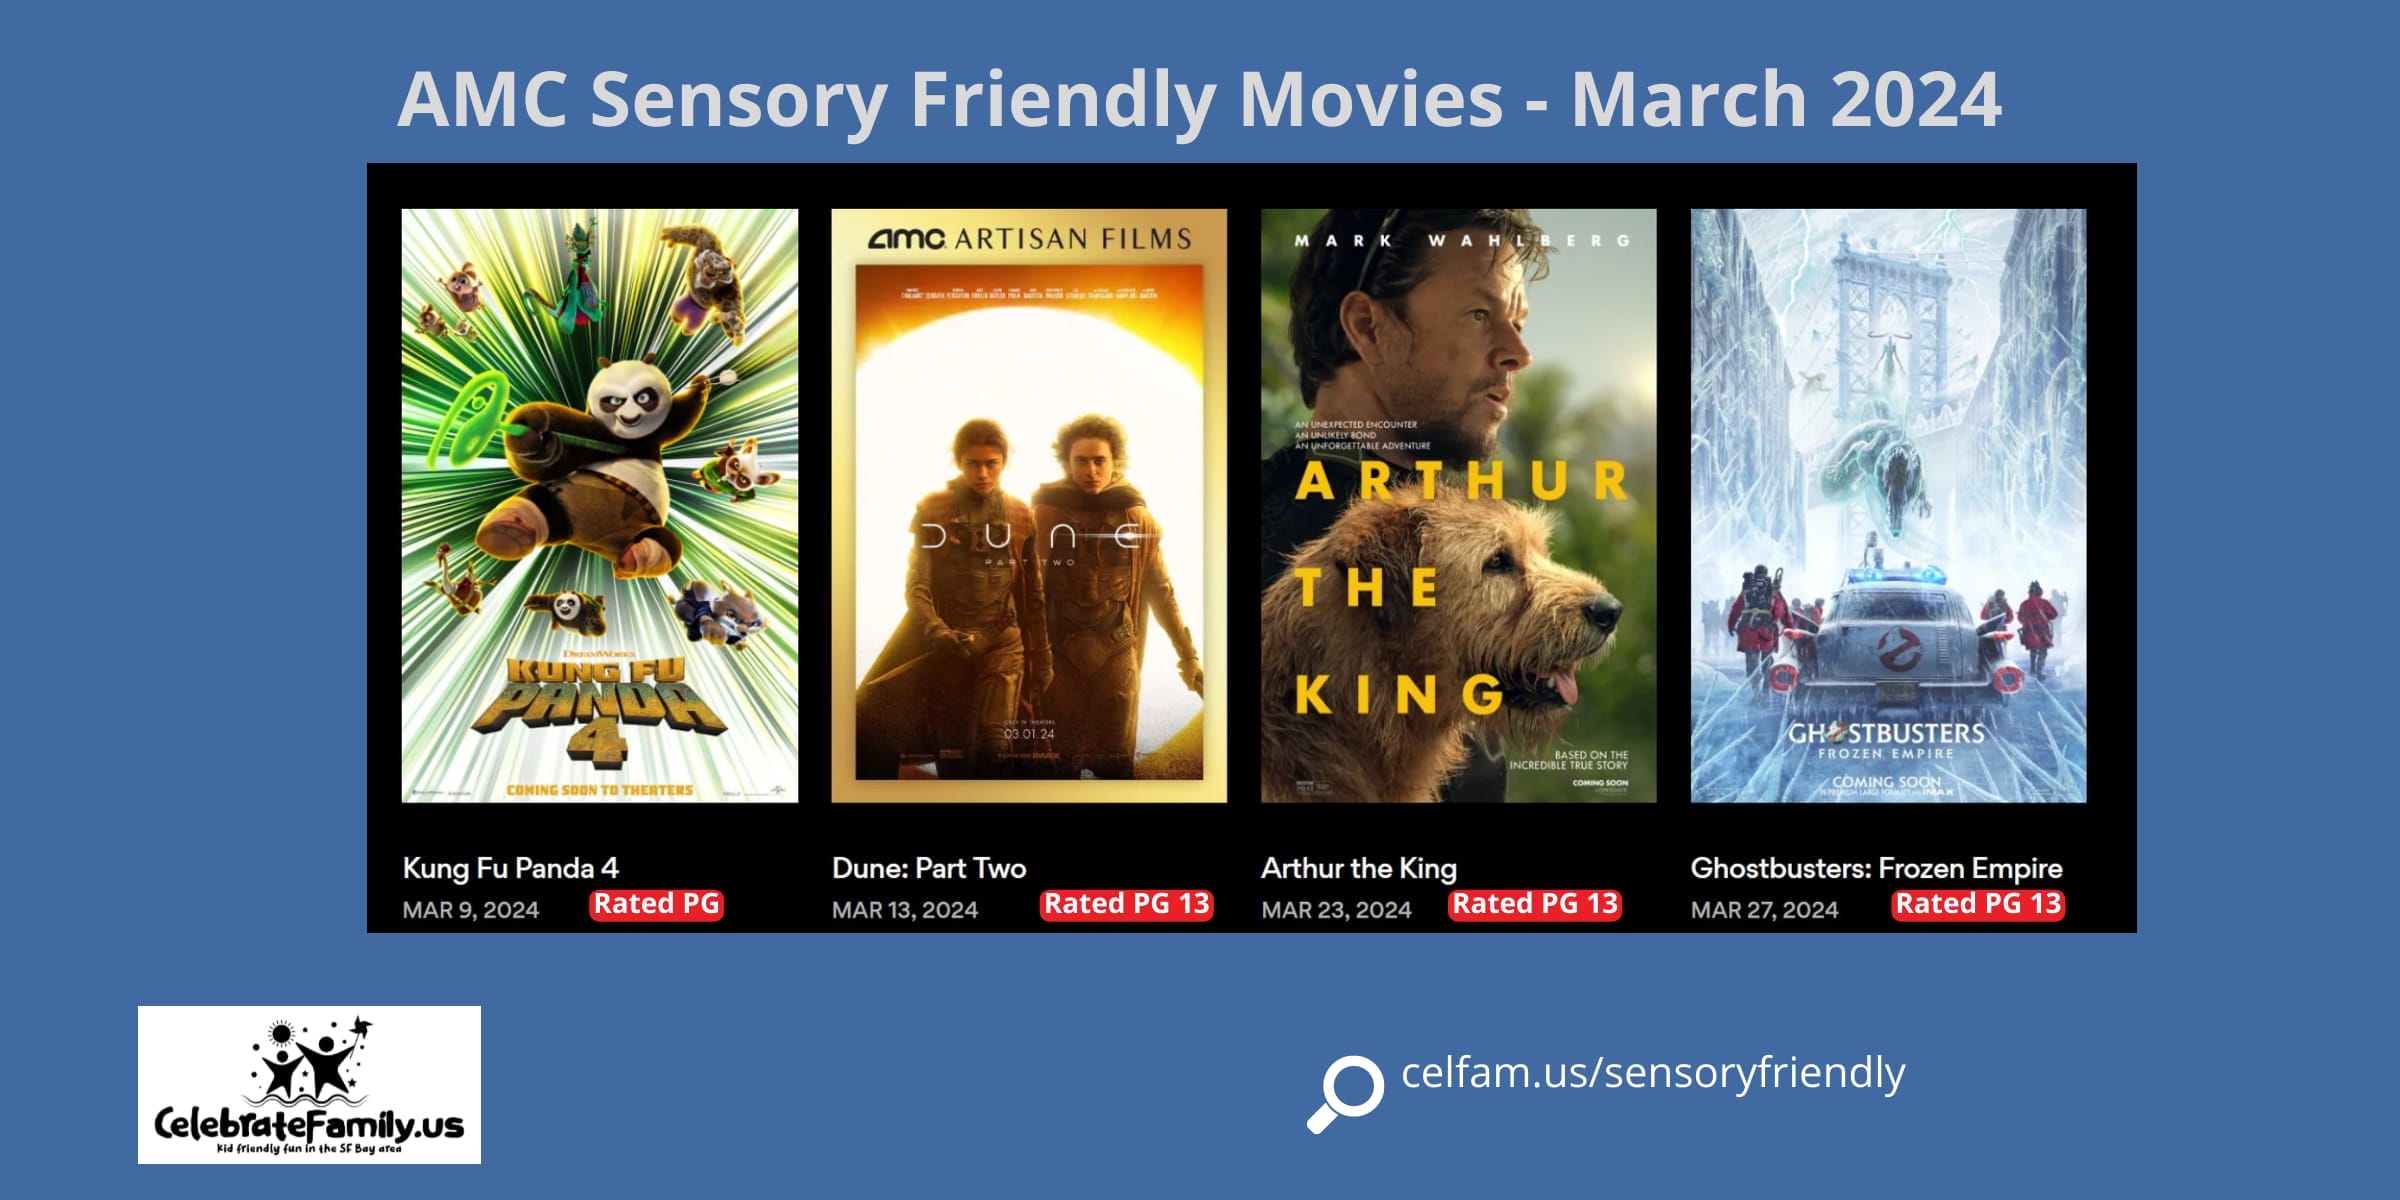 Sensory Friendly Movies in March 2024 at AMC Theaters